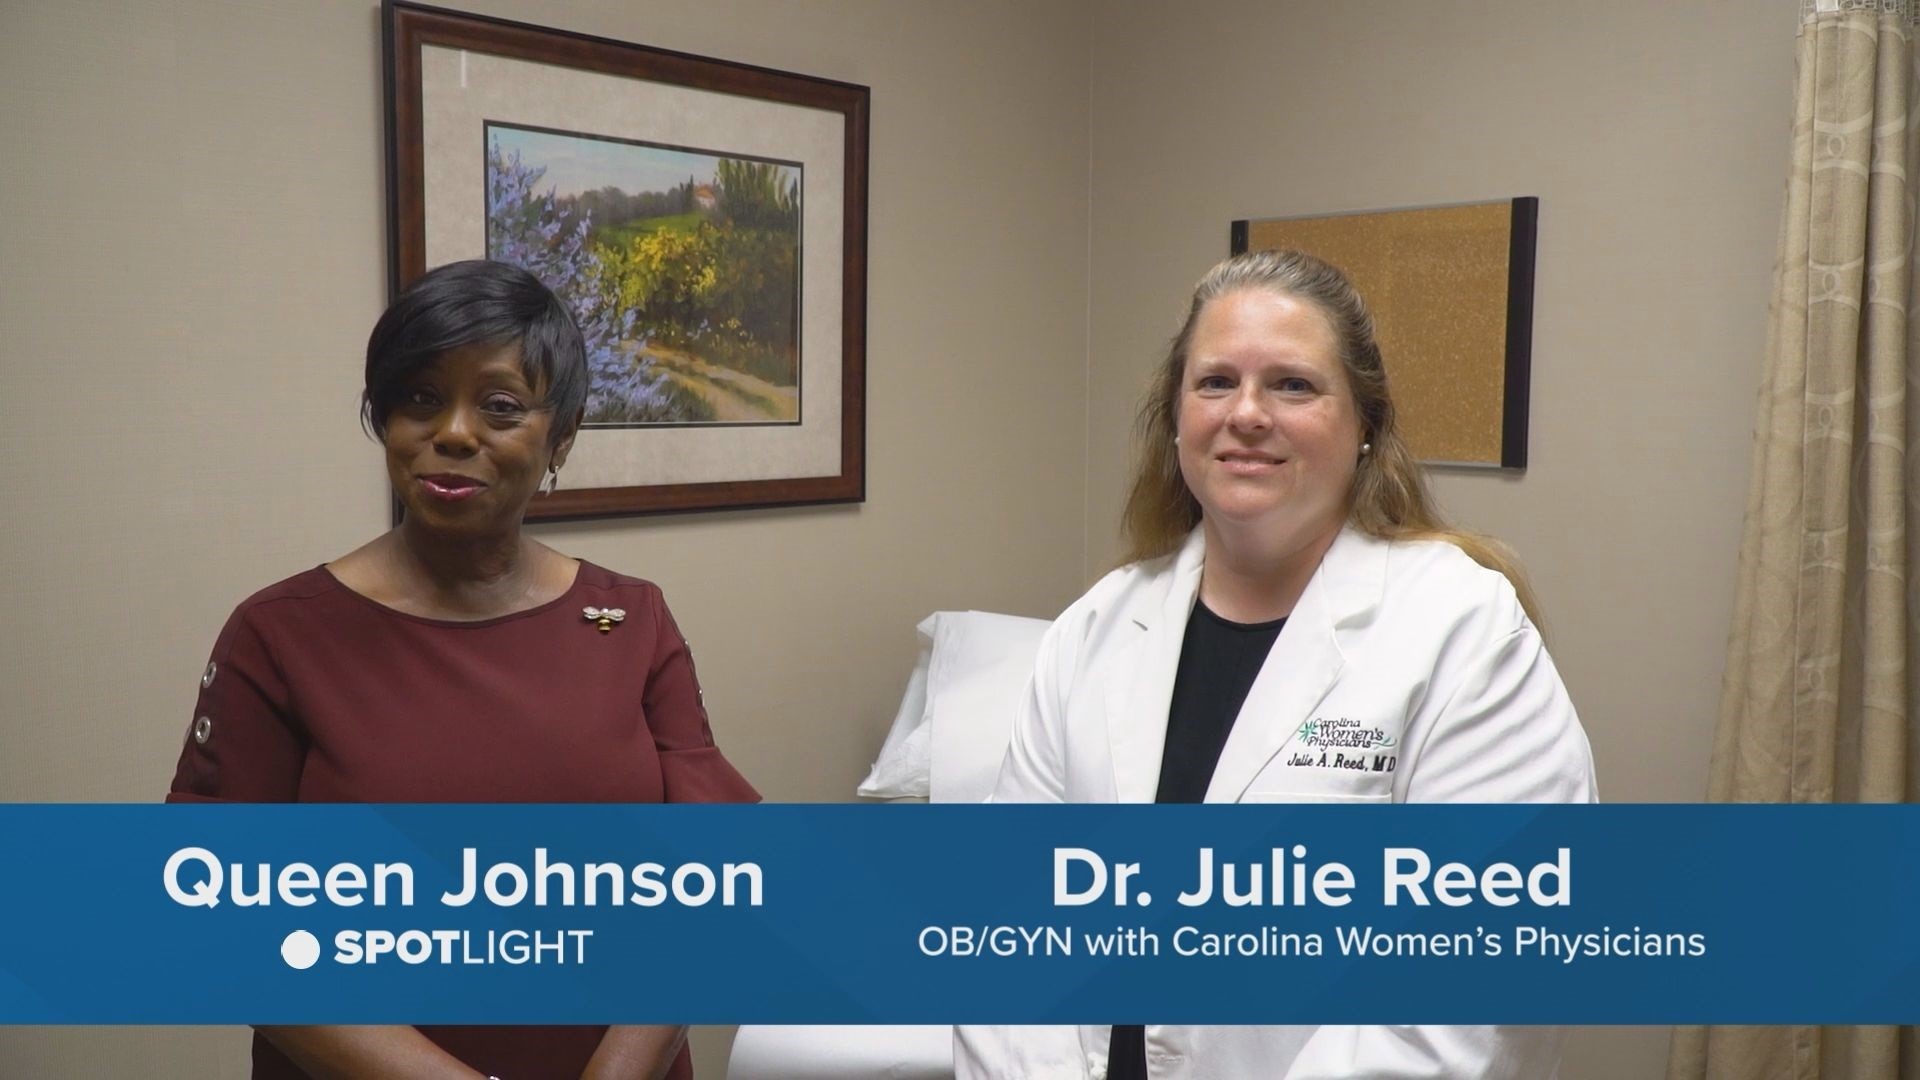 Hear from Dr. Julie Reed with Carolina Women’s Physicians in The Vista regarding preeclampsia.